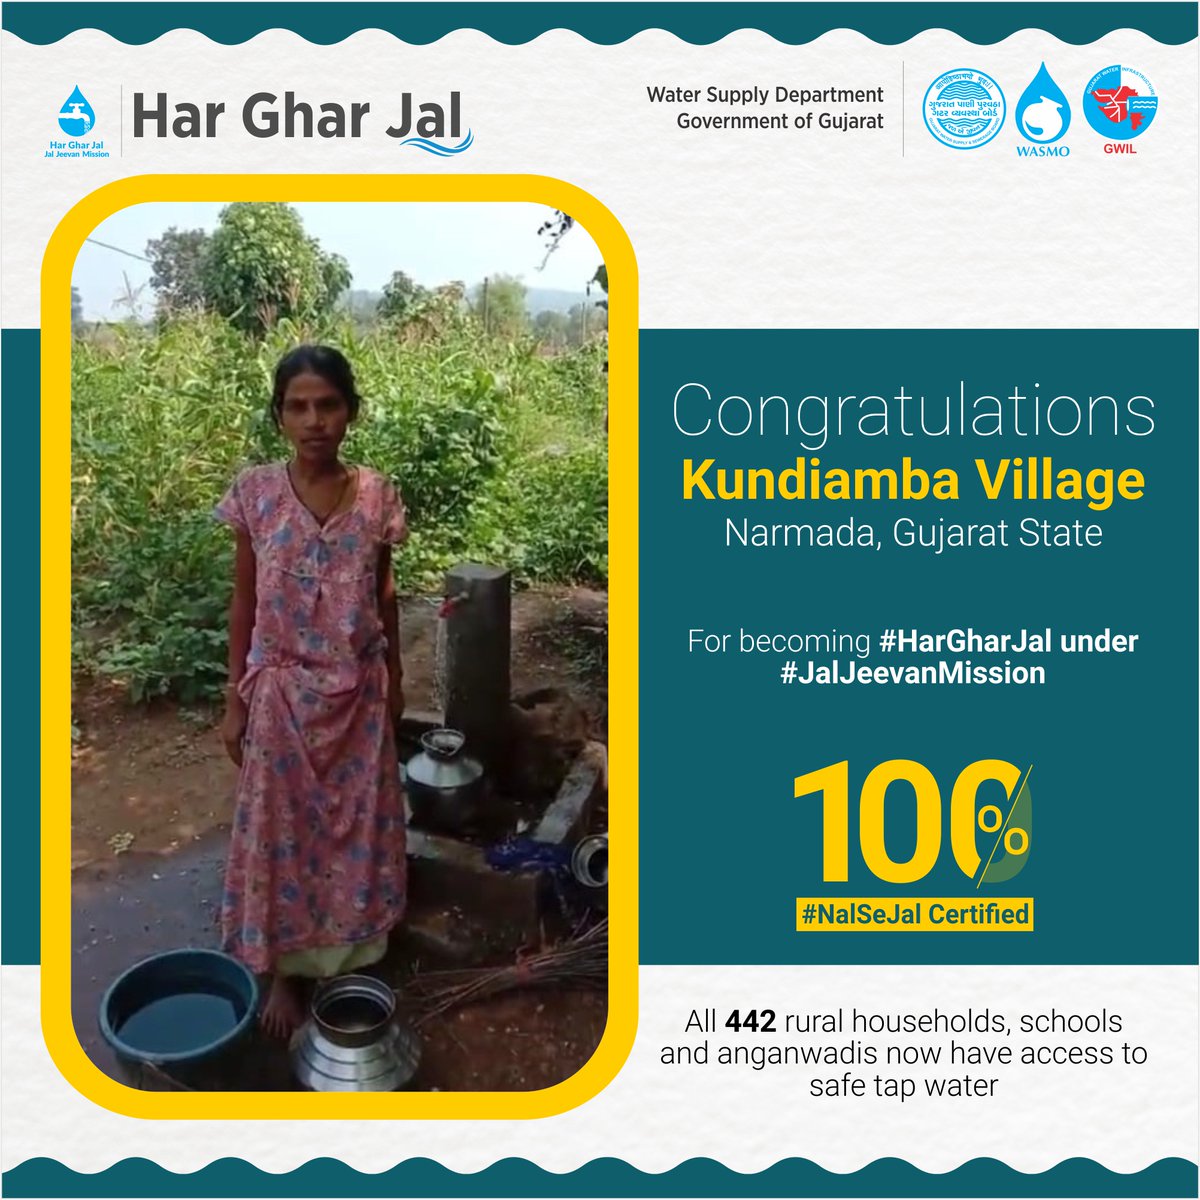 Congratulations to all the people of Kundiamba Village of #Narmada, #Gujarat State, for becoming 100% #HarGharNalSeJal certified. All 442 rural households, schools and anganwadis are now getting safe tap water under #JalJeevanMission